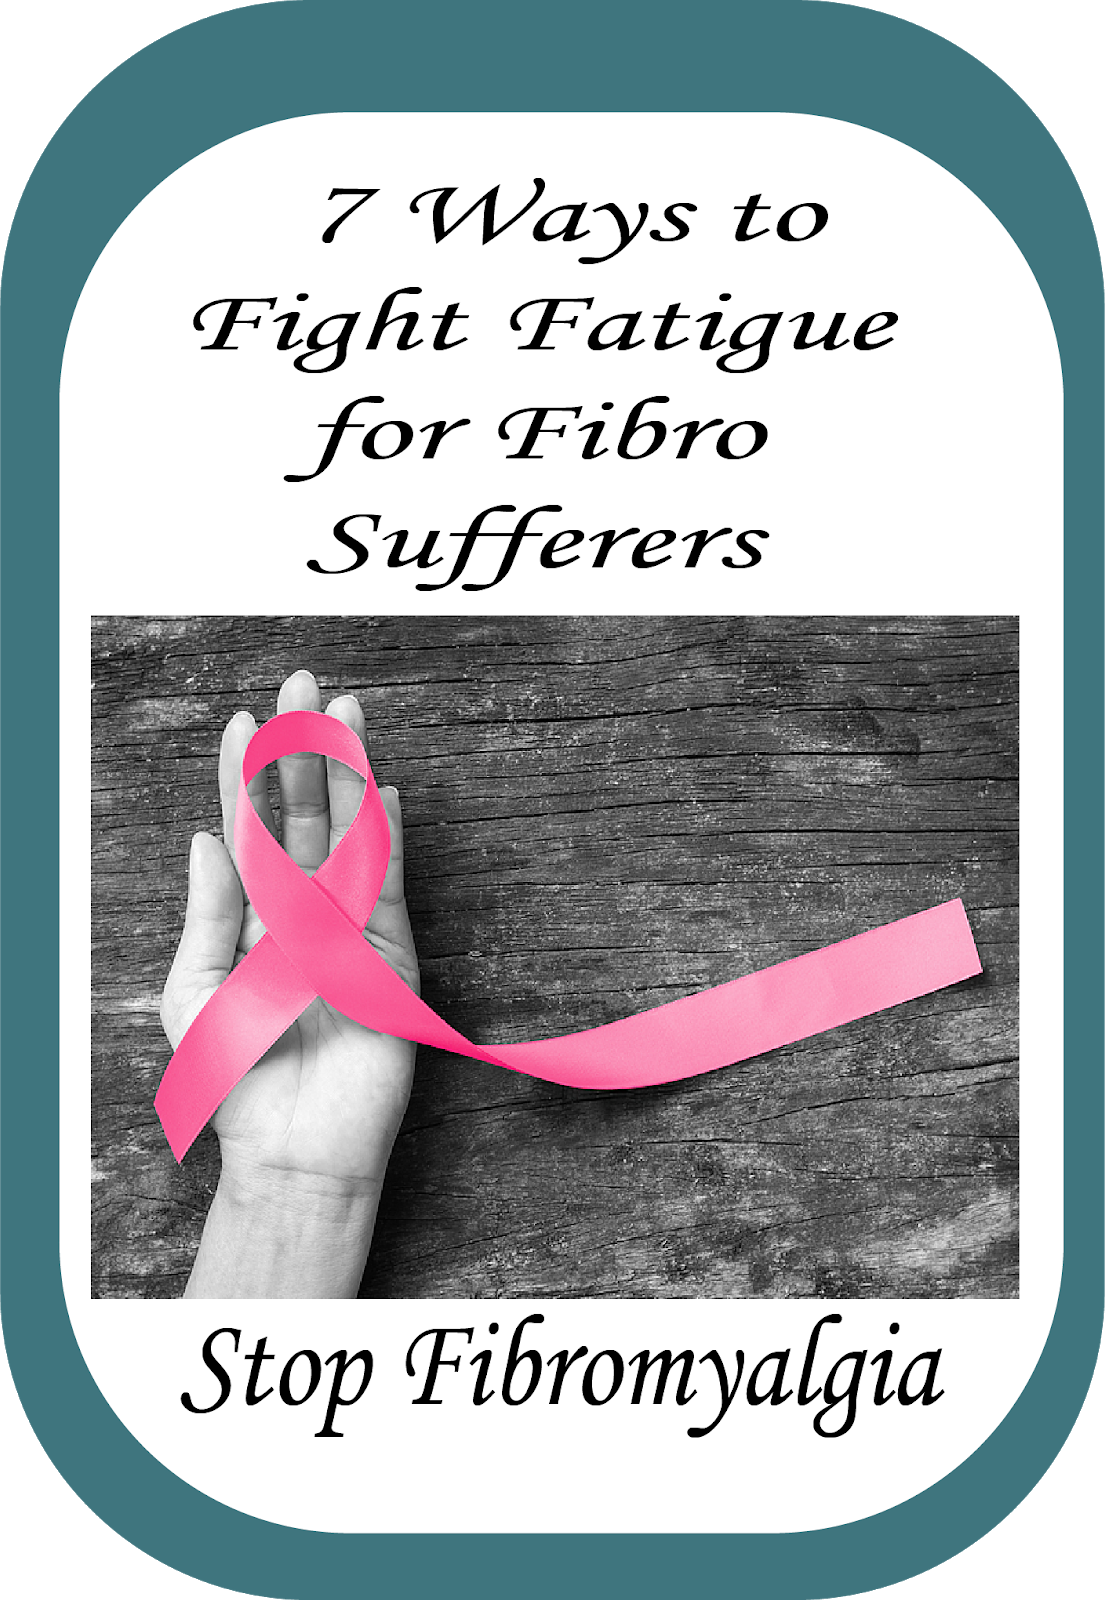 7 Ways to Fight Fatigue for Fibro Sufferers